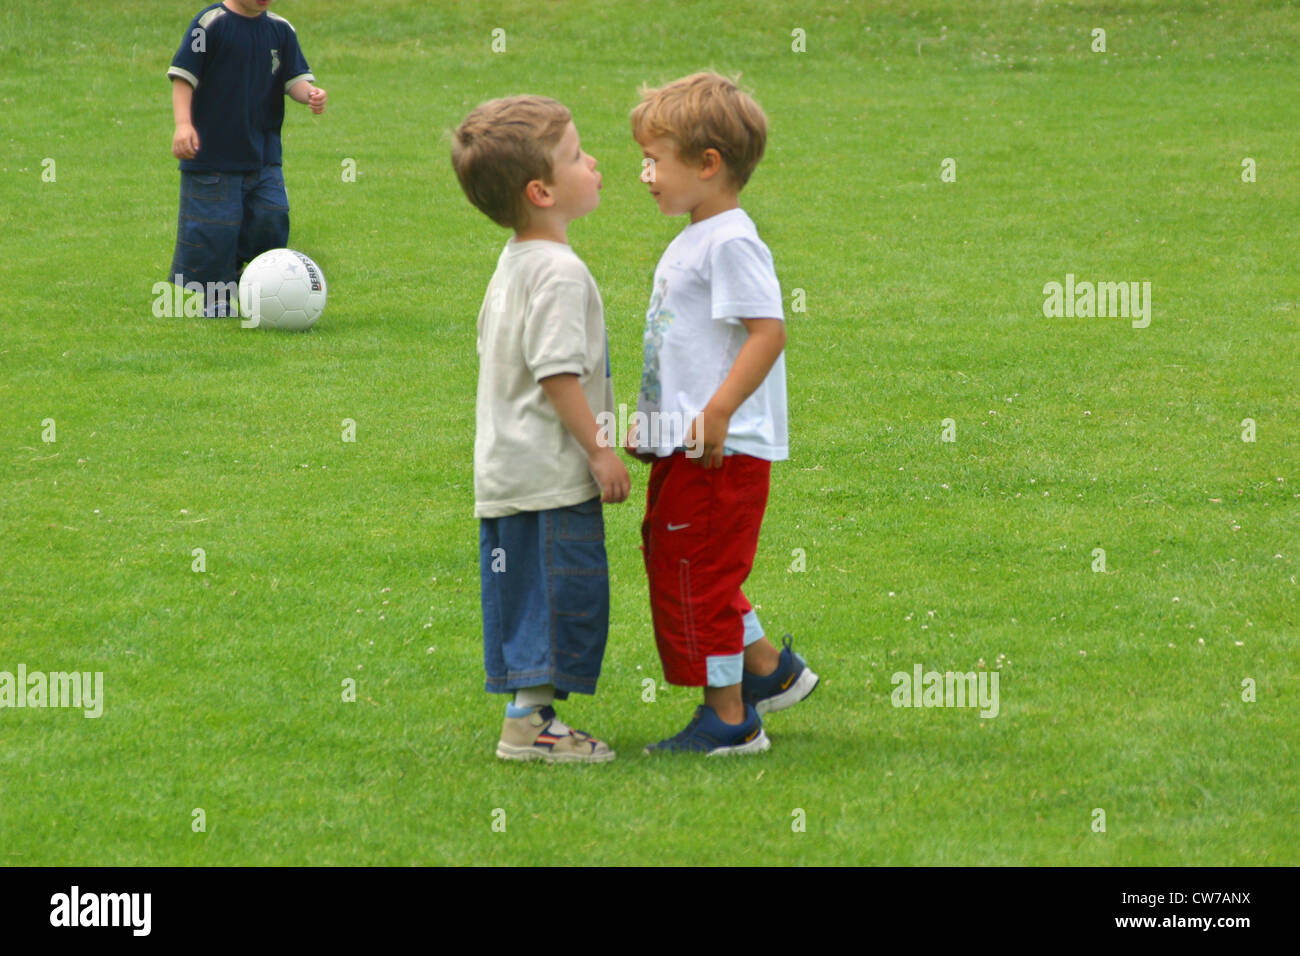 two little boys on a football ground Stock Photo